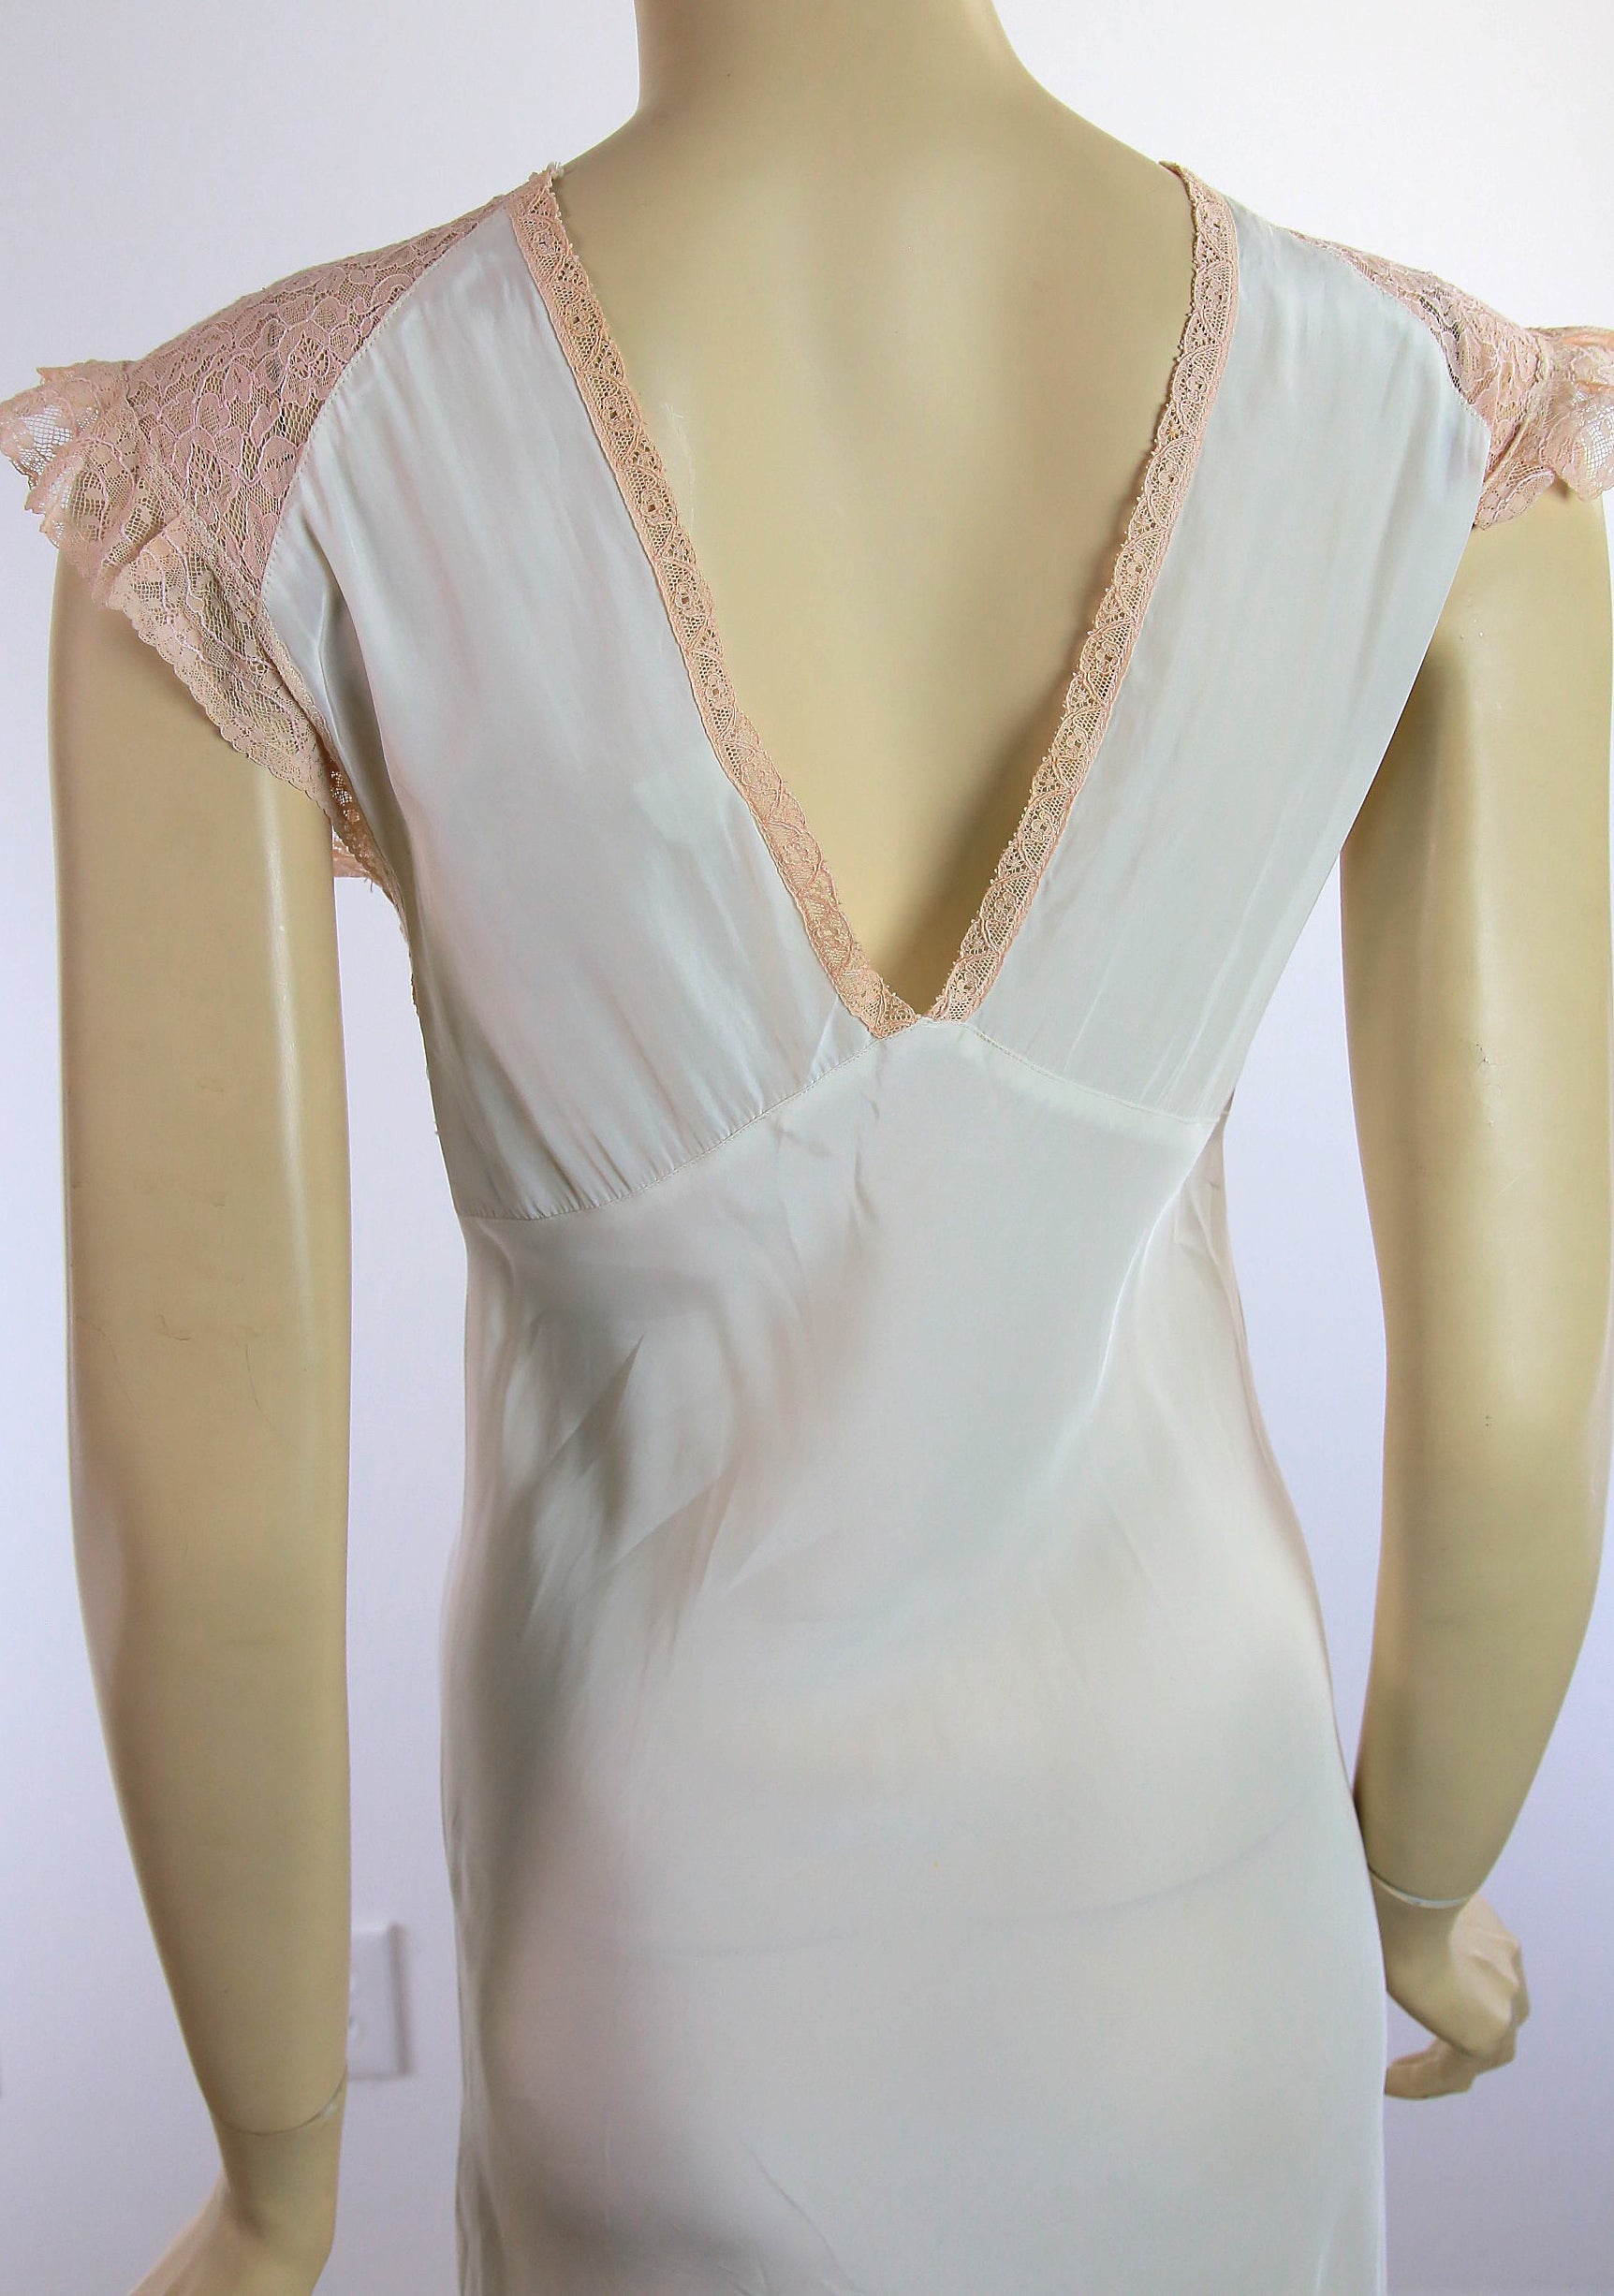 Vintage 40s 1940s WWII era womens lace nightgown